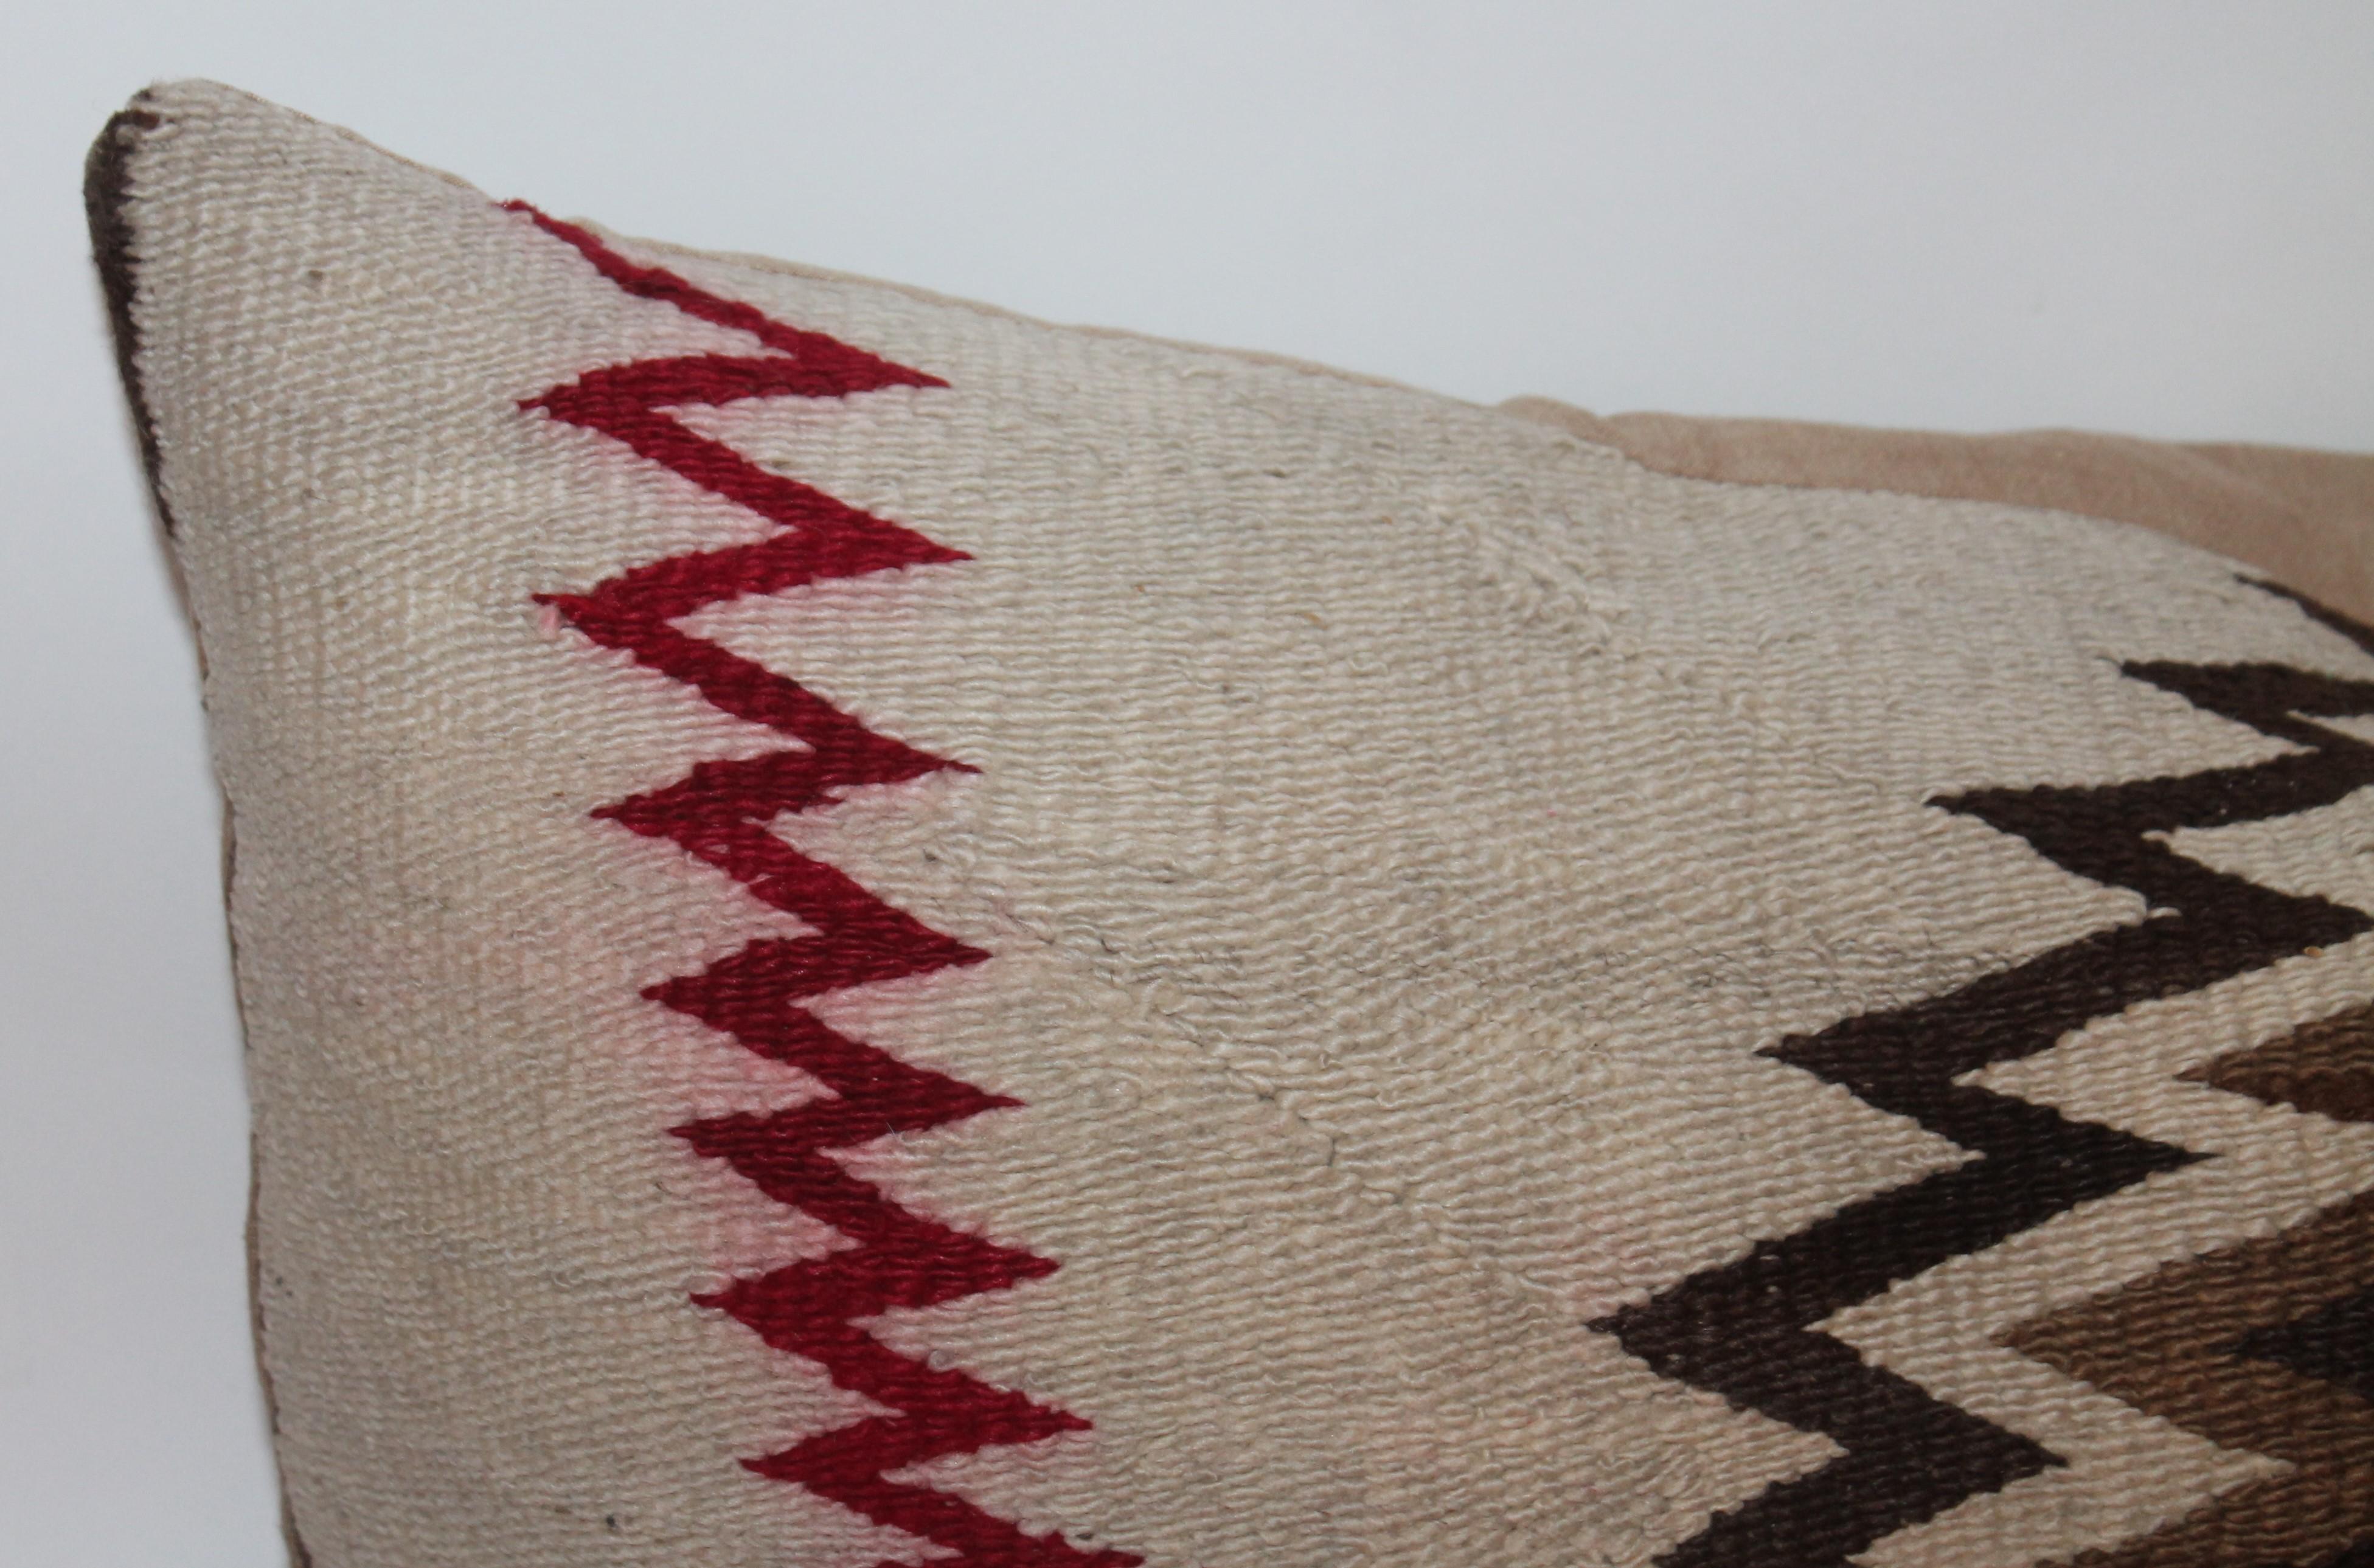 These amazing early 20th century Navajo Indian weaving bolster pillows are in great condition with cotton linen backings. The inserts are down and feather fill.
The geometric design is quite unique and graphic. Sold as a pair!
Smaller pillow